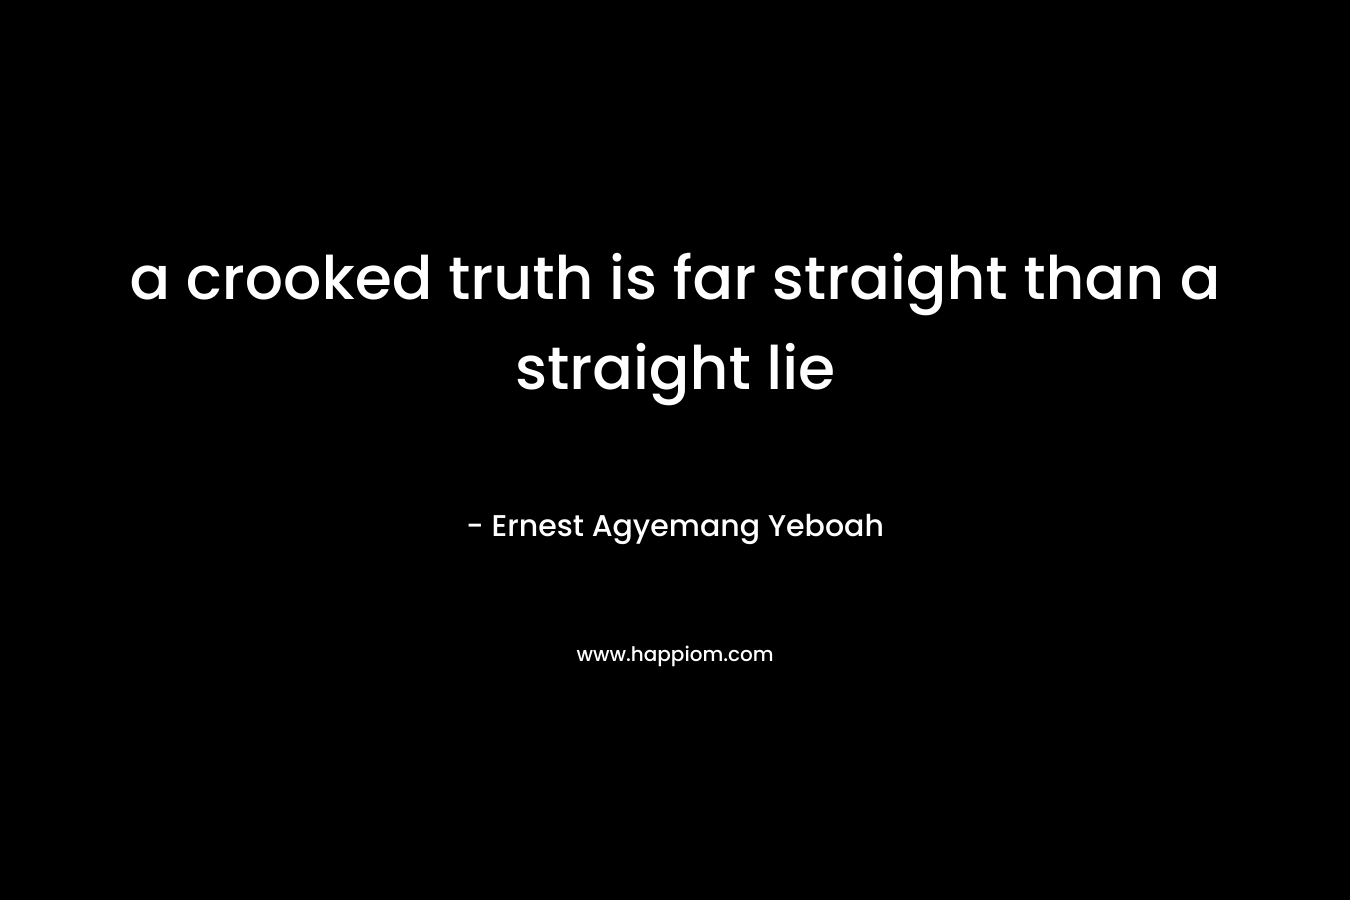 a crooked truth is far straight than a straight lie